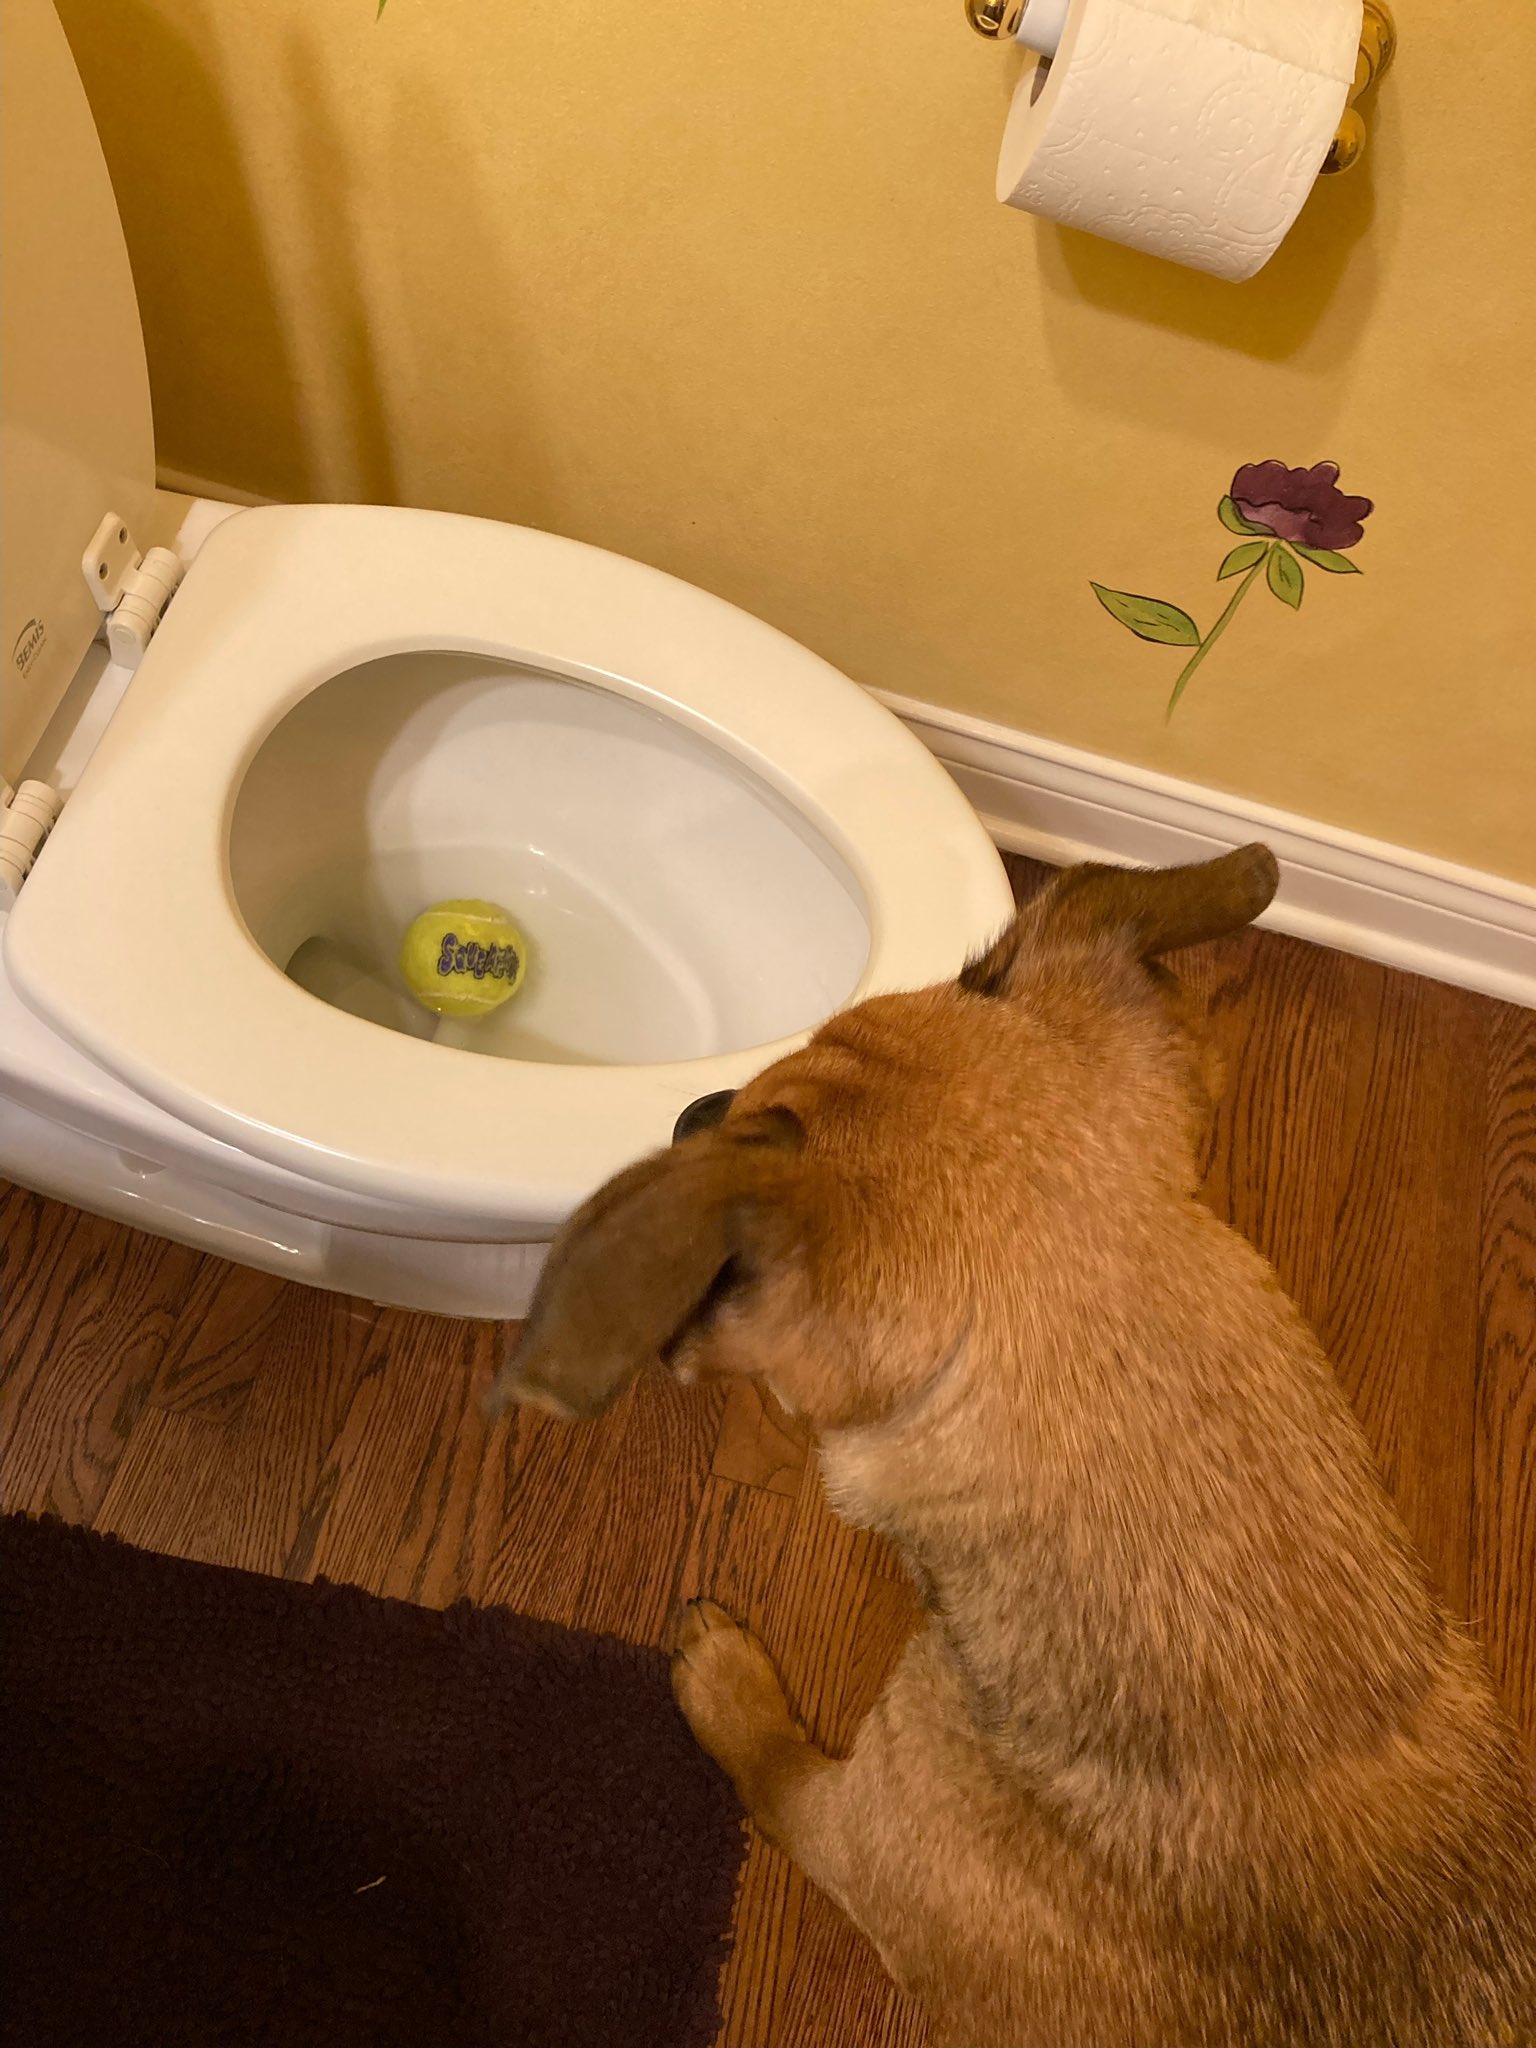 A large brown dog peers into a toilet, where a soggy tennis ball is floating.